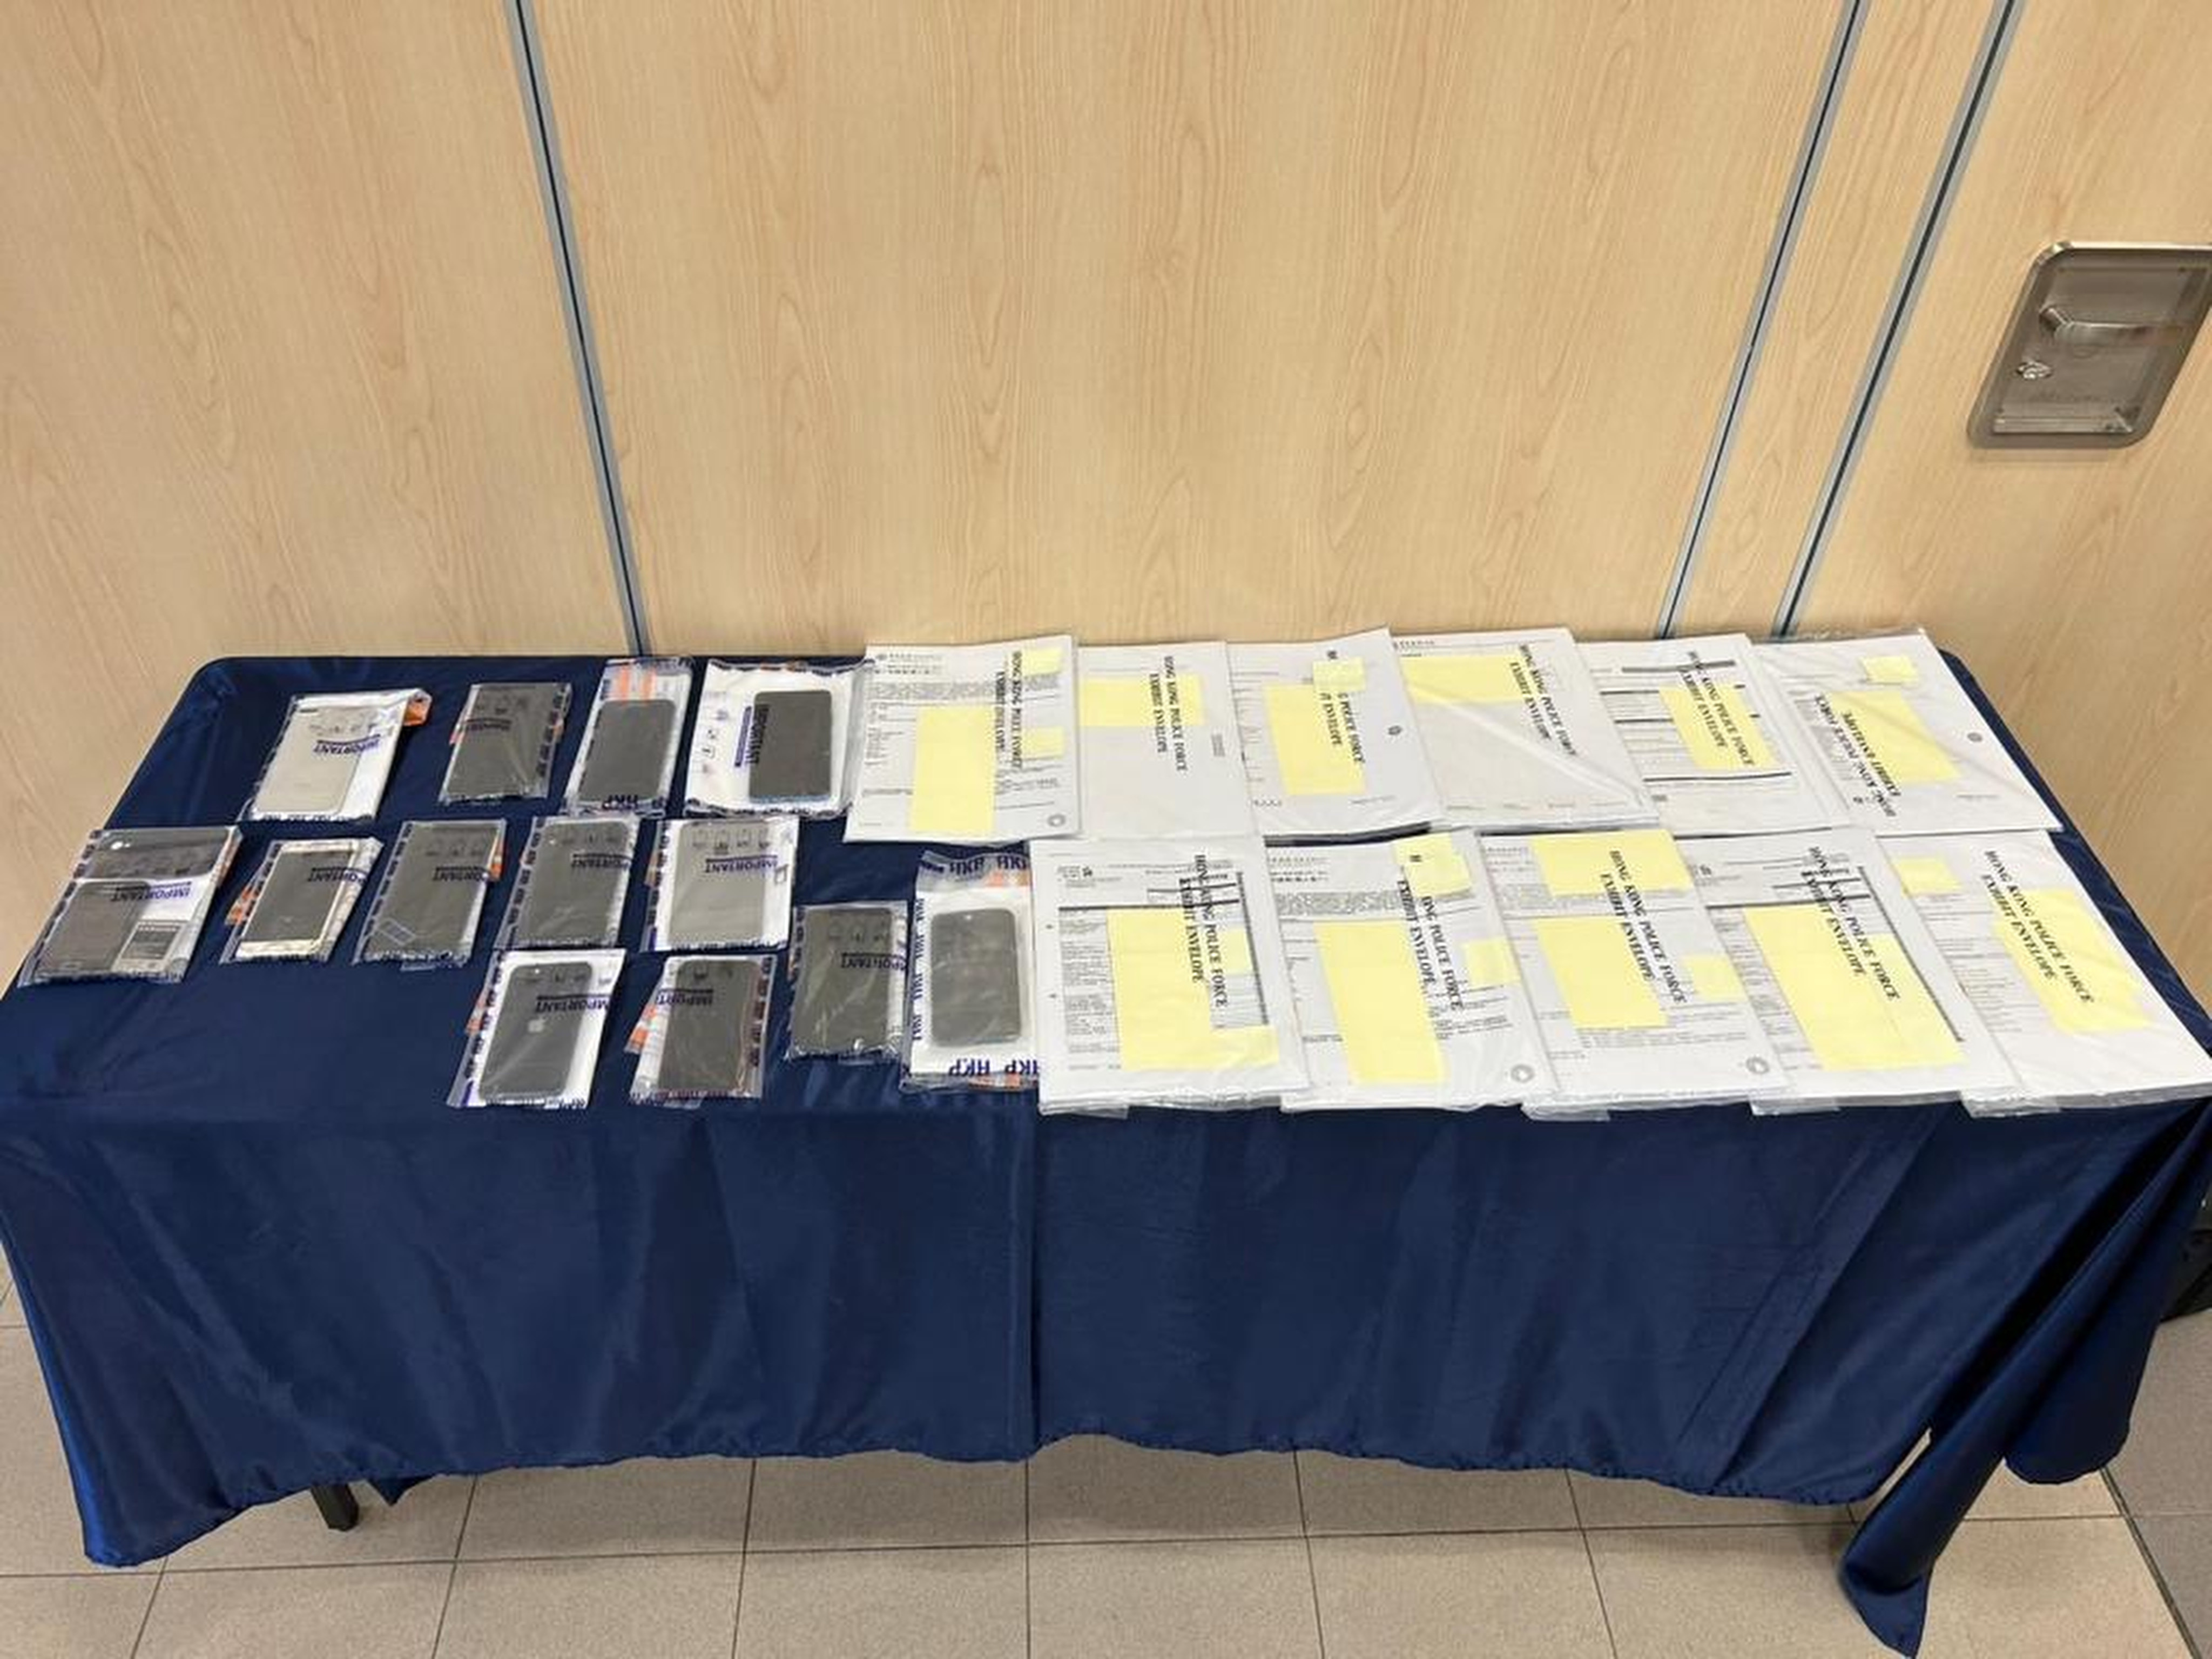 Police display evidence related to the case. Photo: Handout